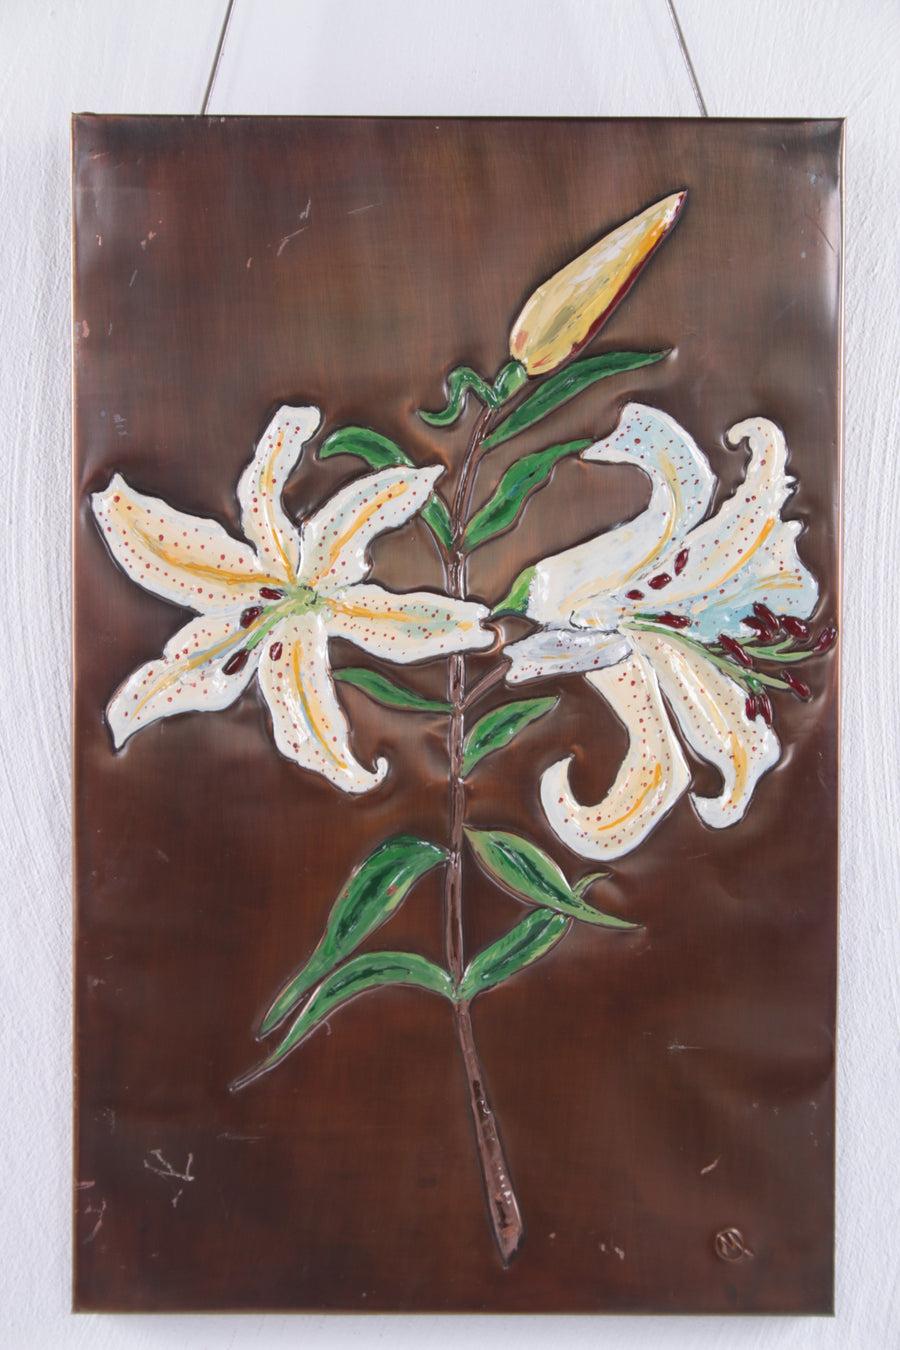 Copper Wall Decoration with Enamel Lilies, 1960s

Additional information:
Dimensions: 32 W x 2 D x 50 H cm
Period of Time : 1960
Country of origin: Germany
Condition: Very good